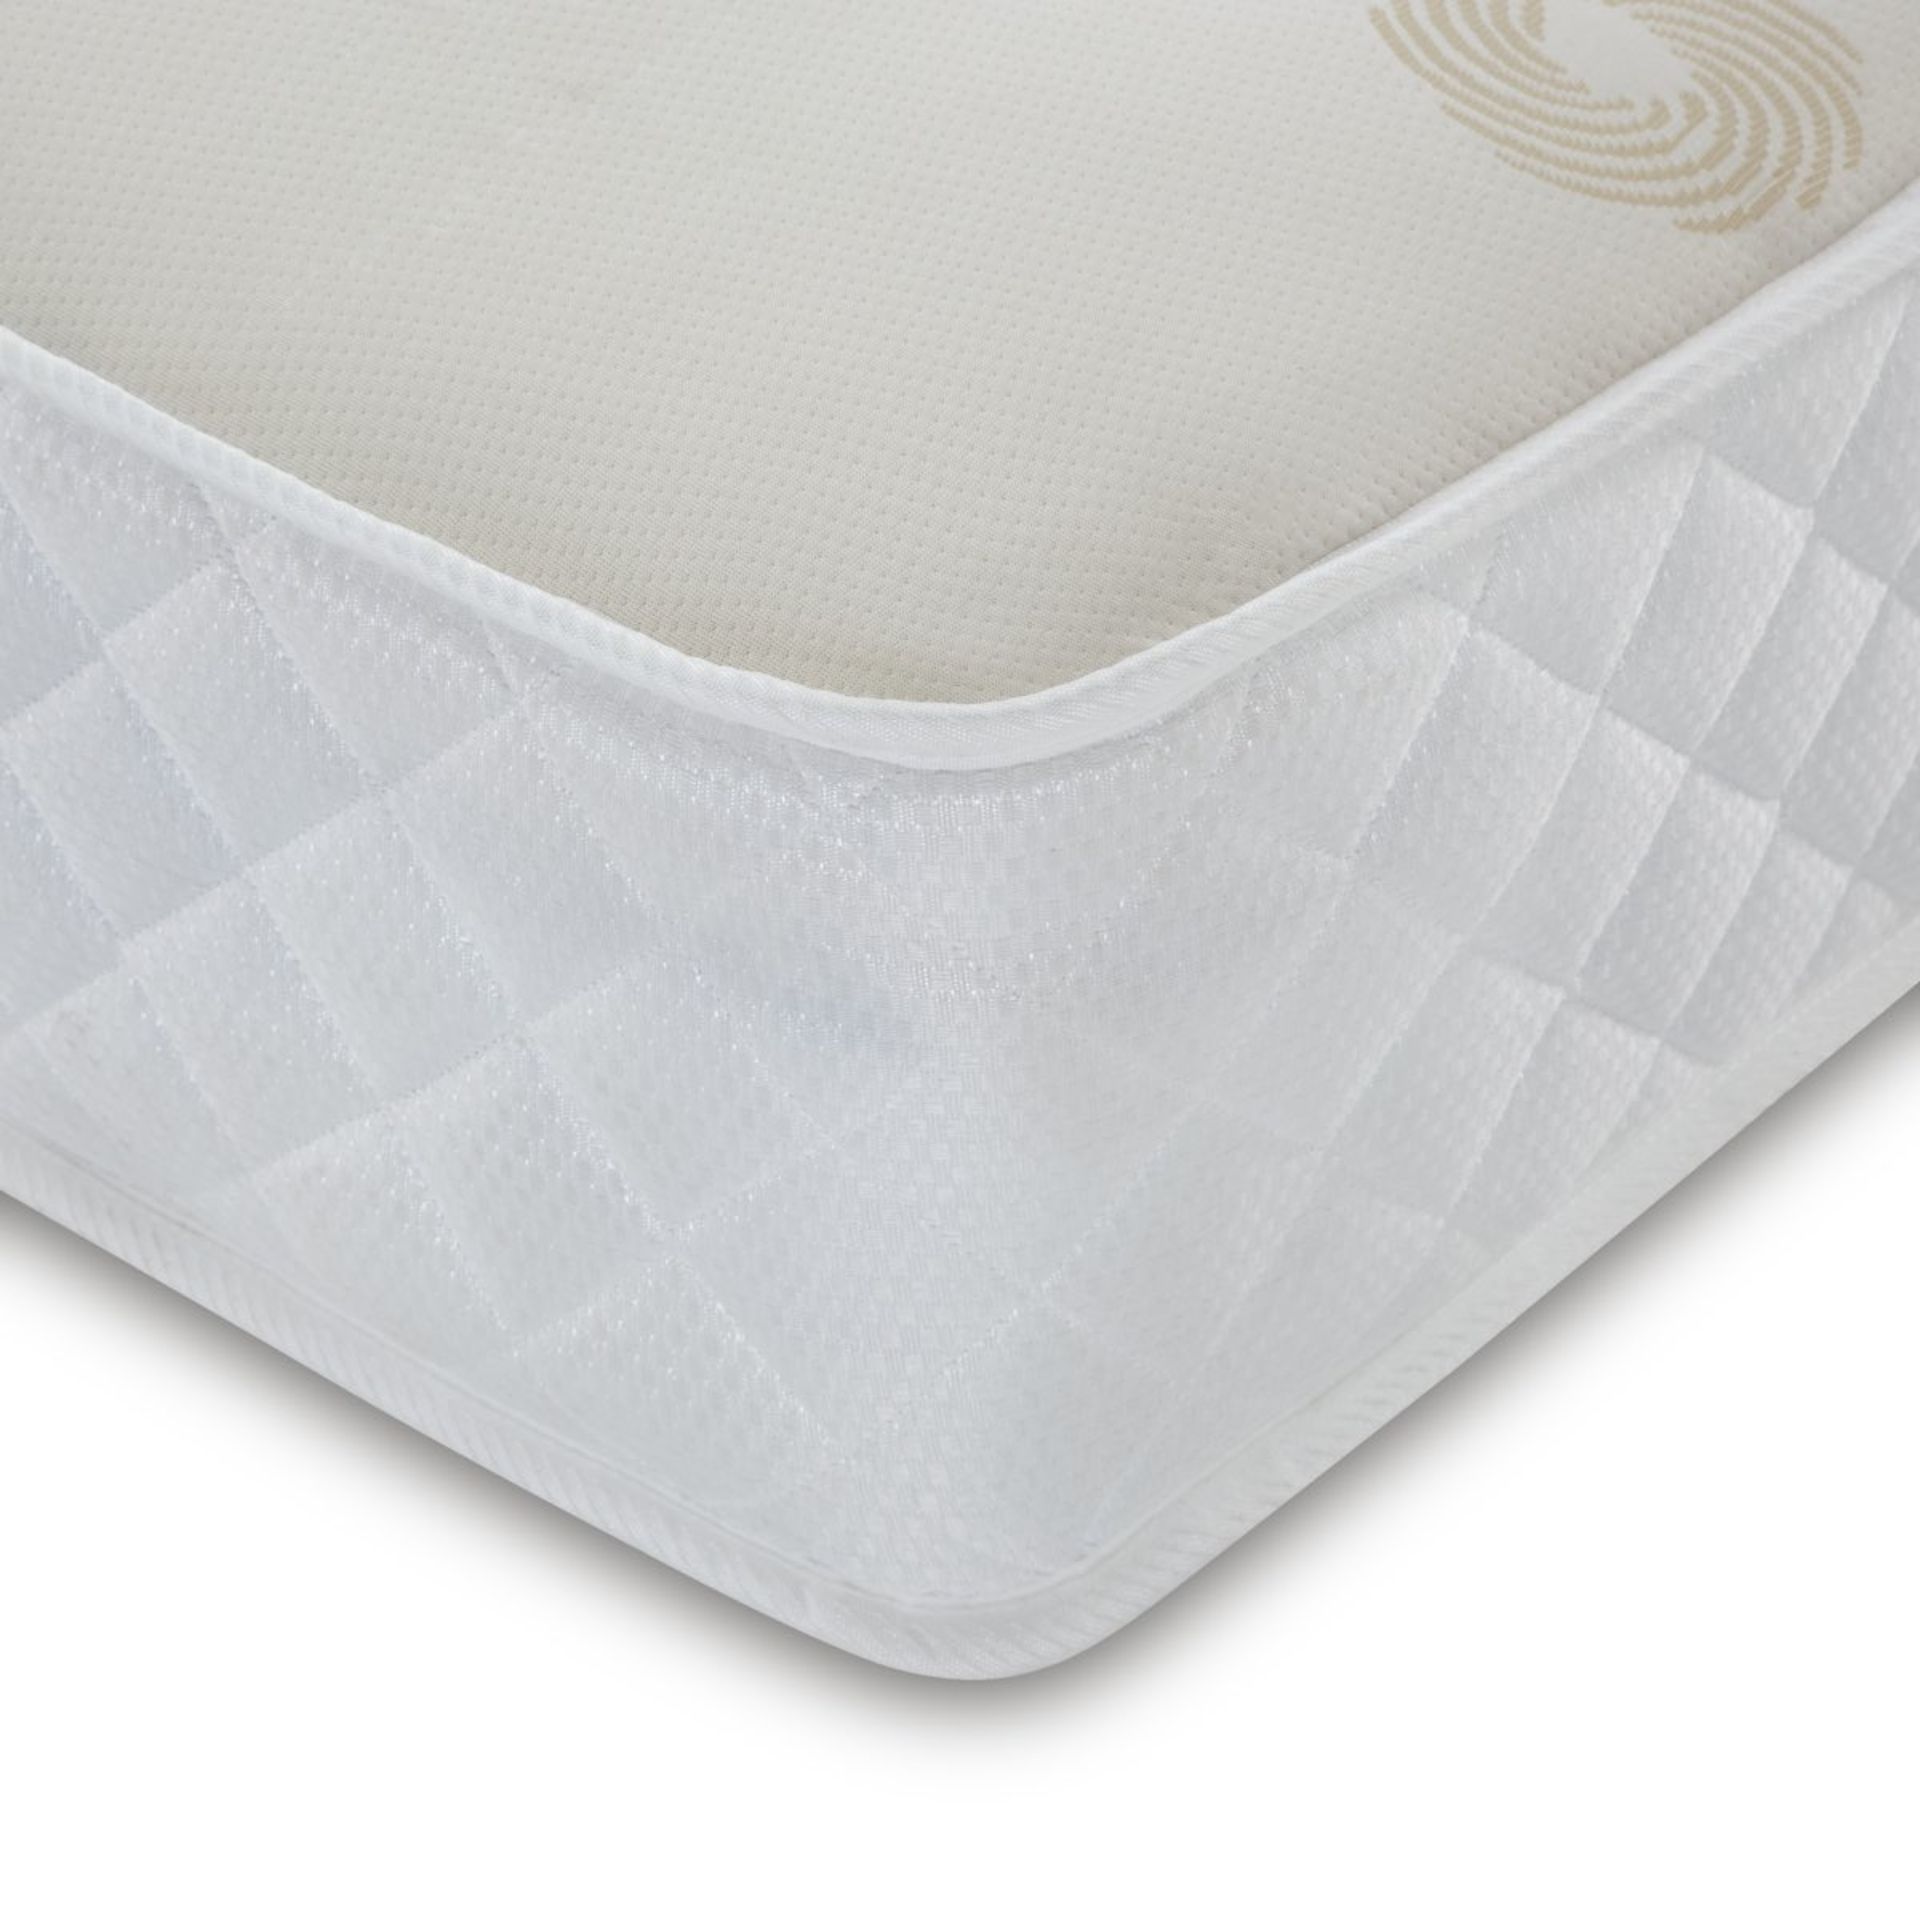 1 x King Size Open Coil Mattress With Memory Foam - Firmness: Medium-soft - Dimensions: 150 x 23 x - Image 2 of 6